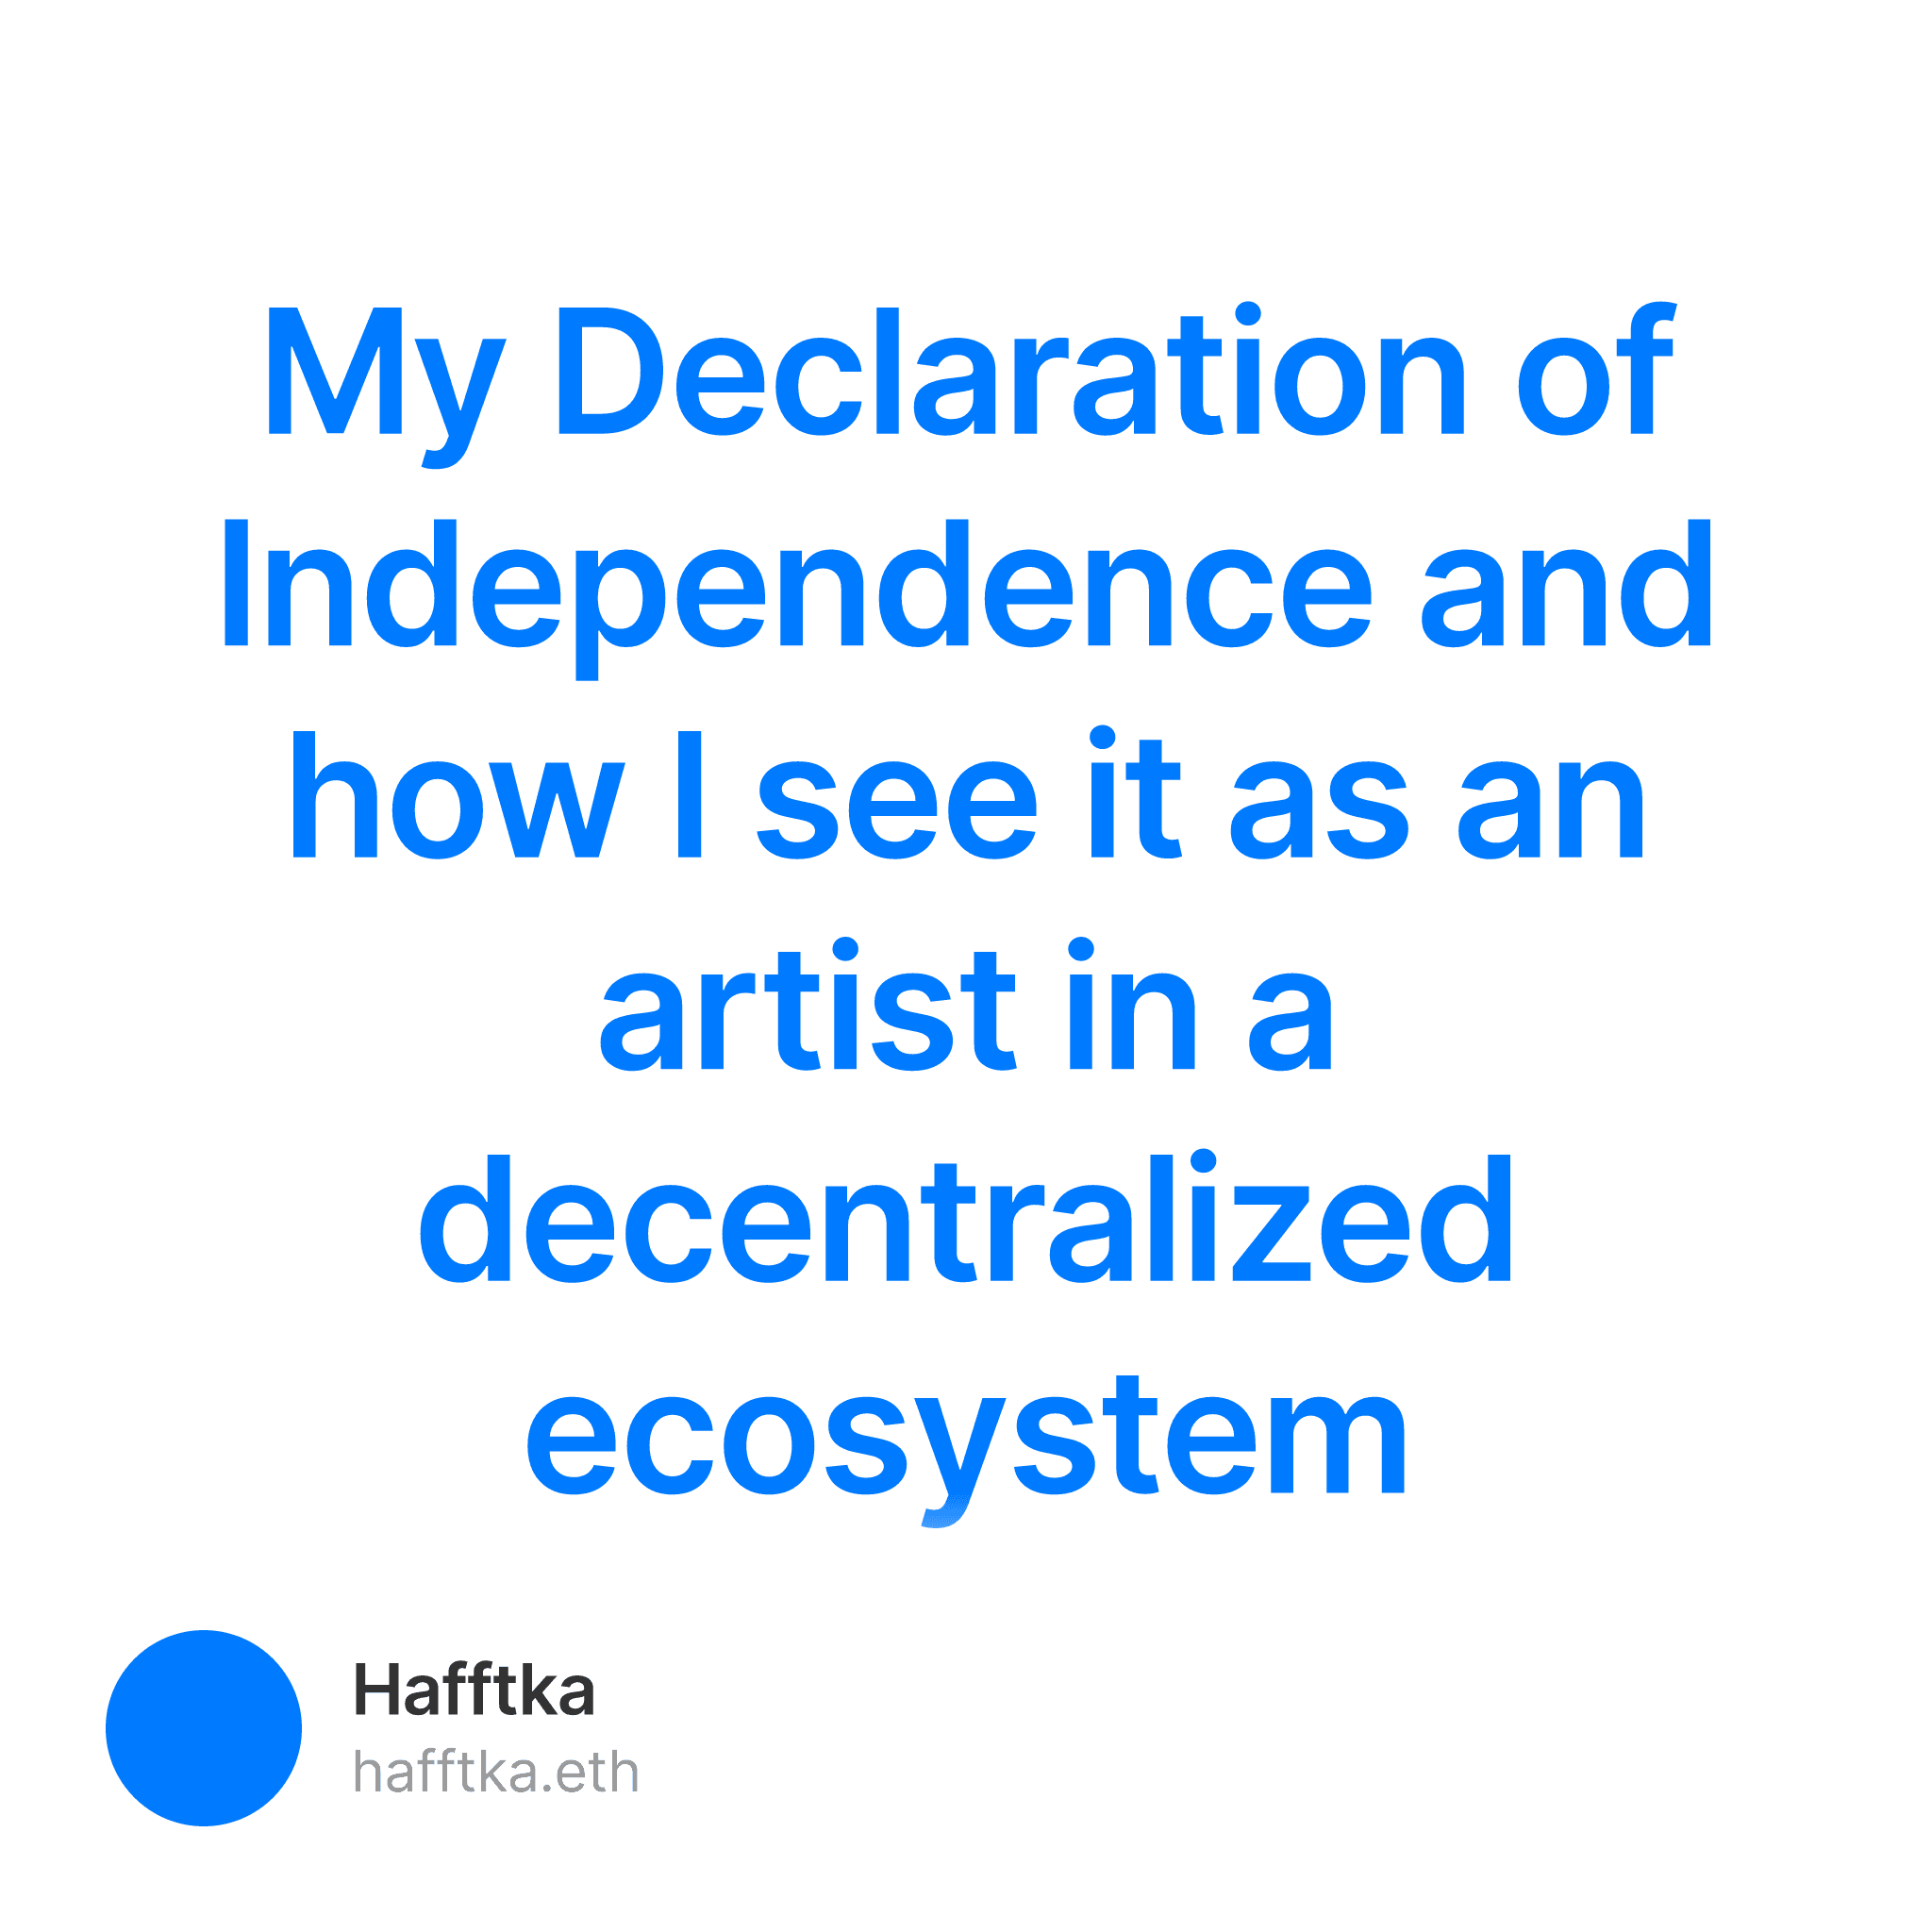 My Declaration of Independence and how I see it as an artist in a decentralized ecosystem  132/500